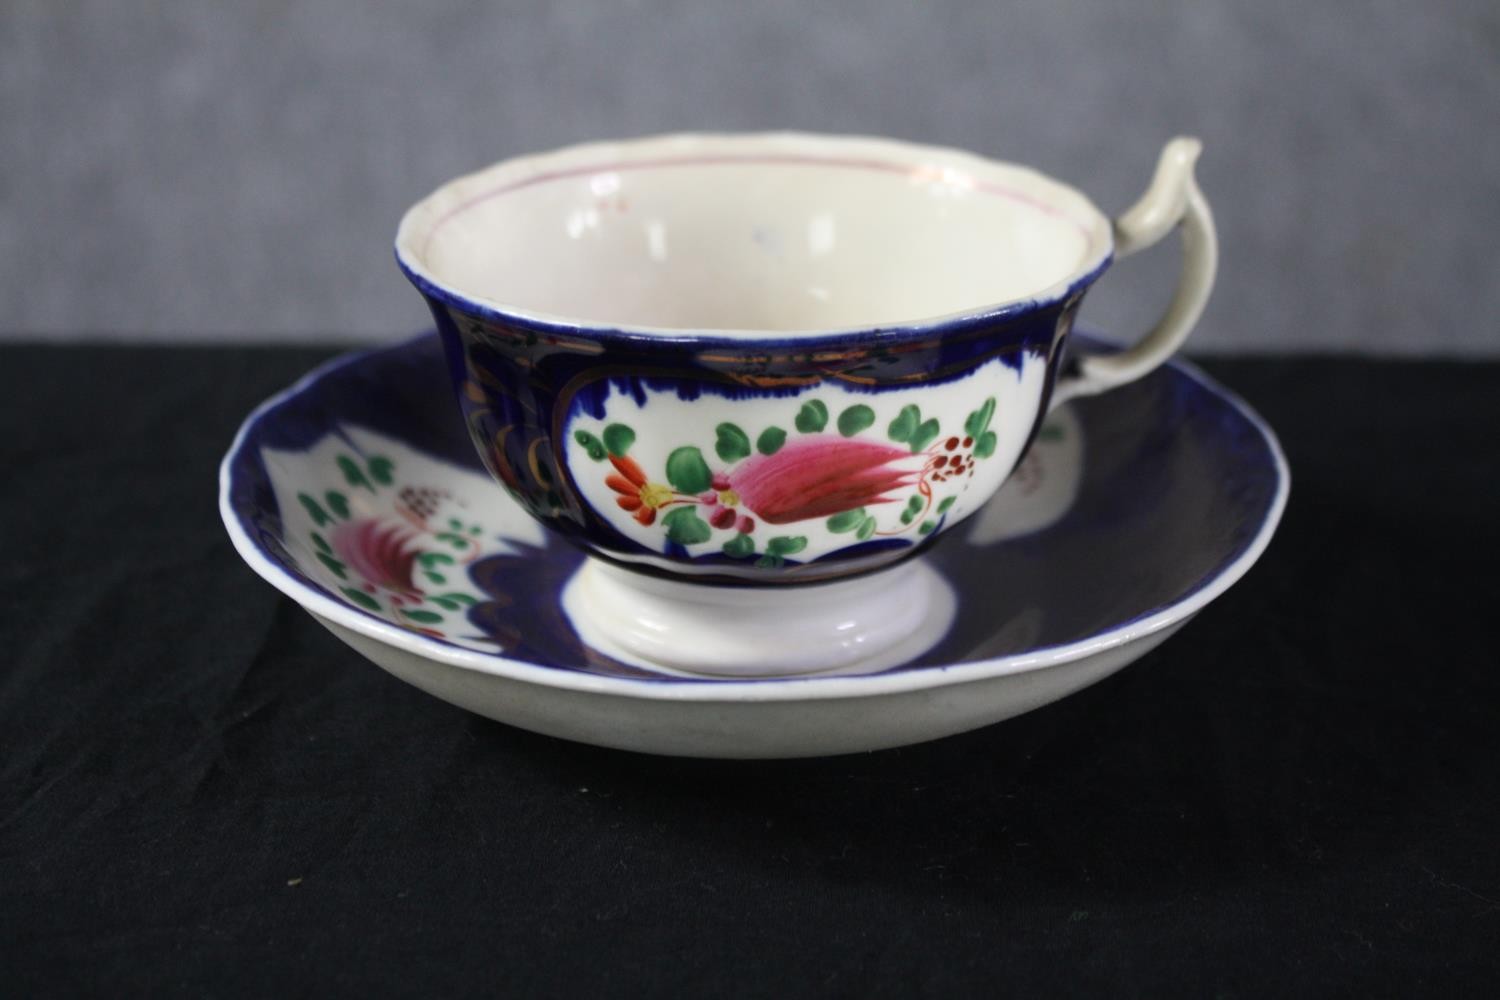 A 19th century hand painted Gaudy Welsh decorative tea set. Incomplete. Includes teacups and - Image 7 of 8